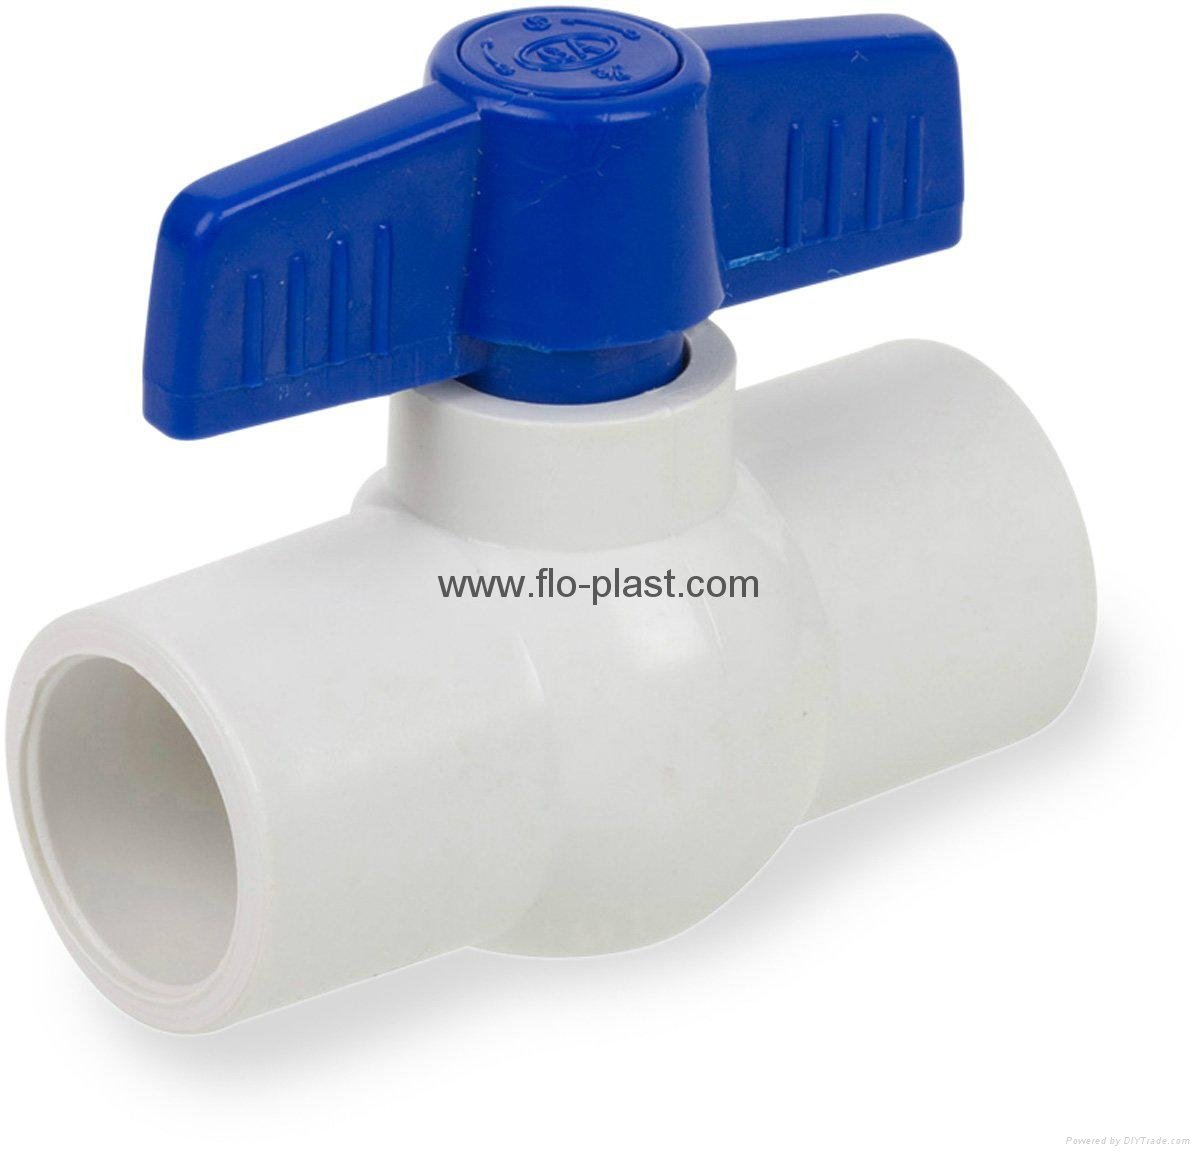 1/2 Inch PVC Ball Valve With NPT Thread Ends And Butterfly Handle For Water 5